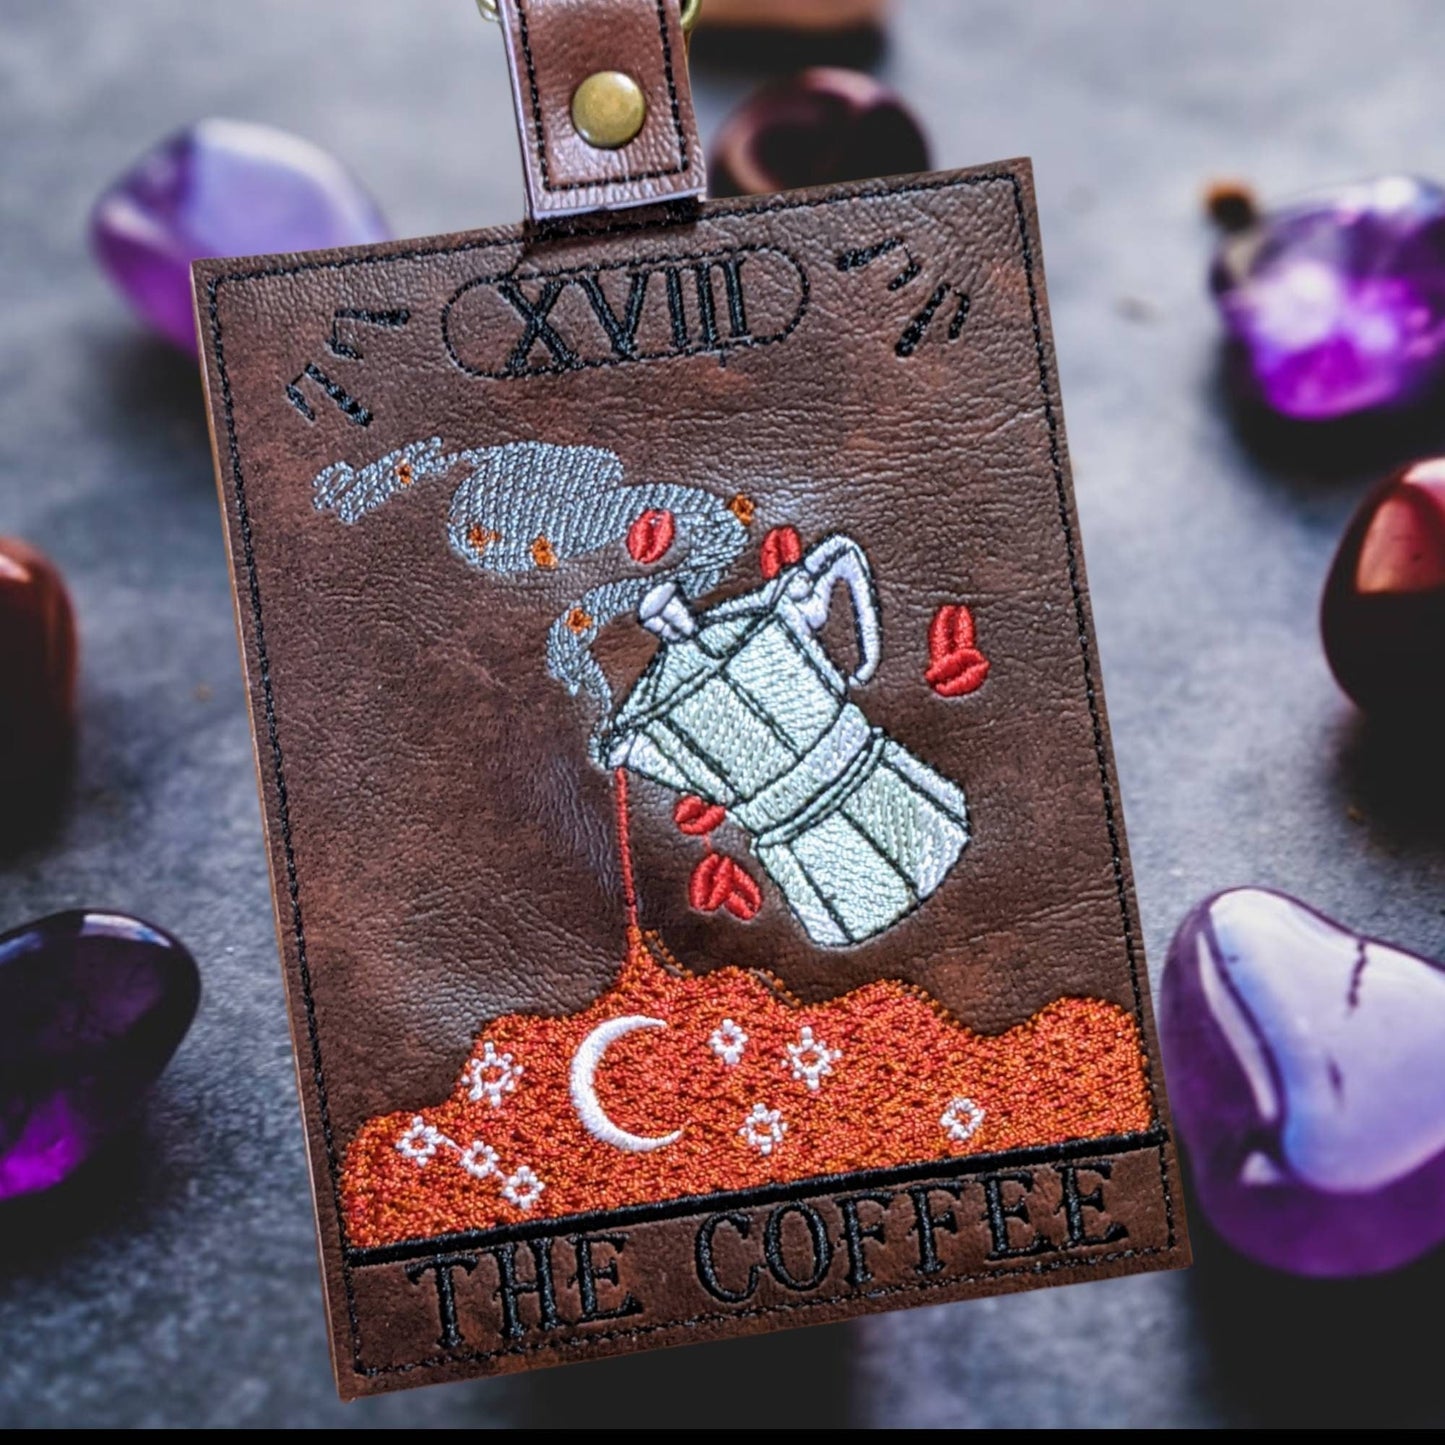 Tarot card vaccine card protector. Attach to purse, bag, backpack or beltloops- Vinyl, vegan leather.